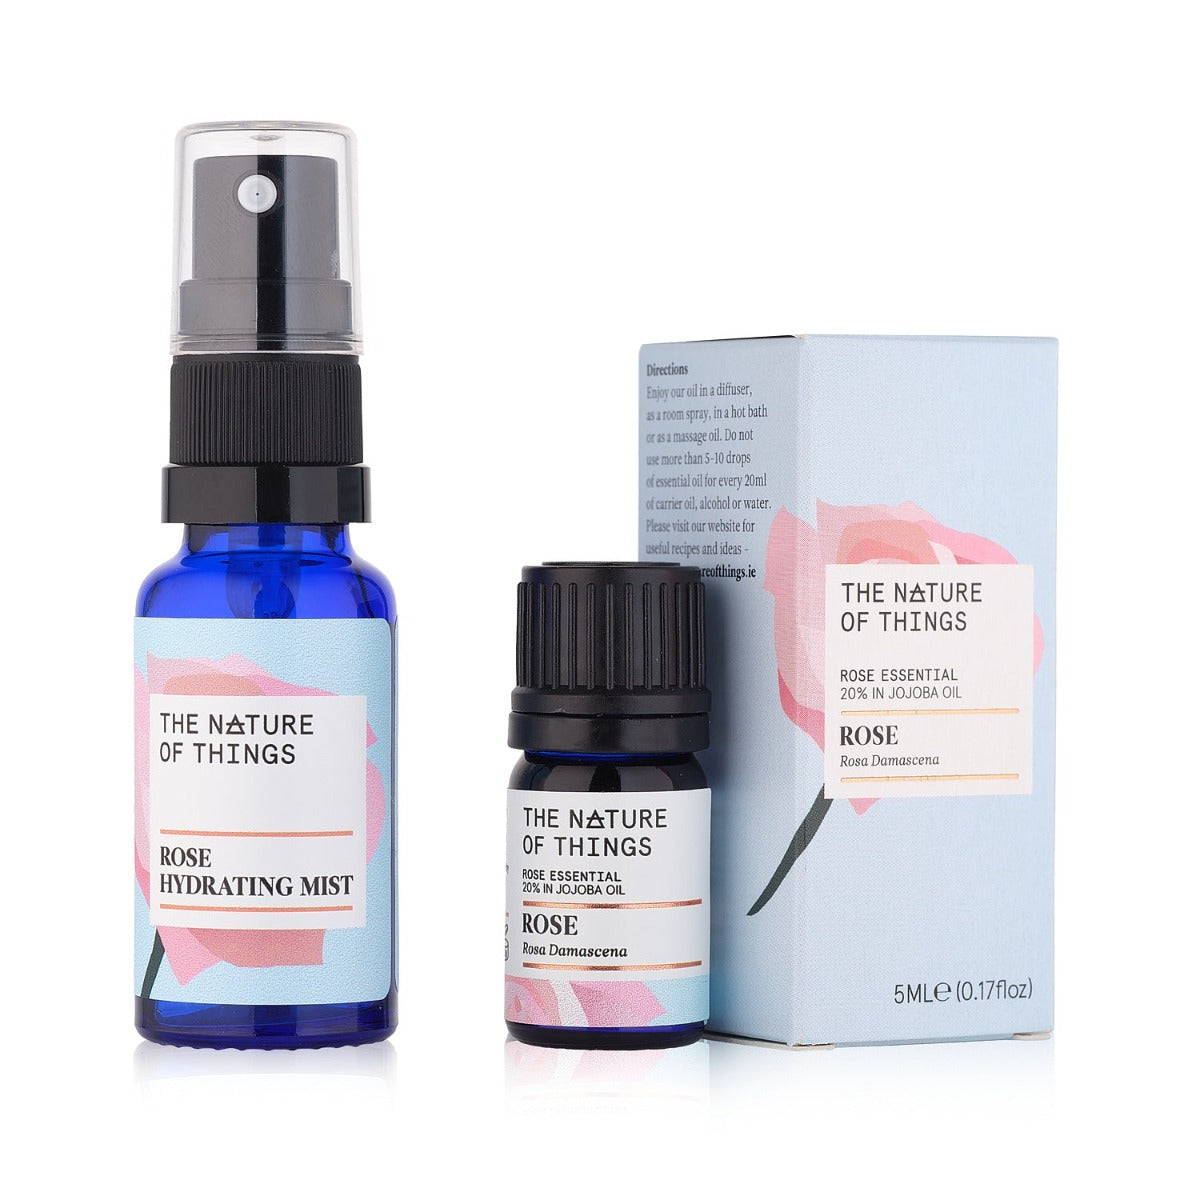 Gift Set - Rose Hydrating Mist from The Nature of Things